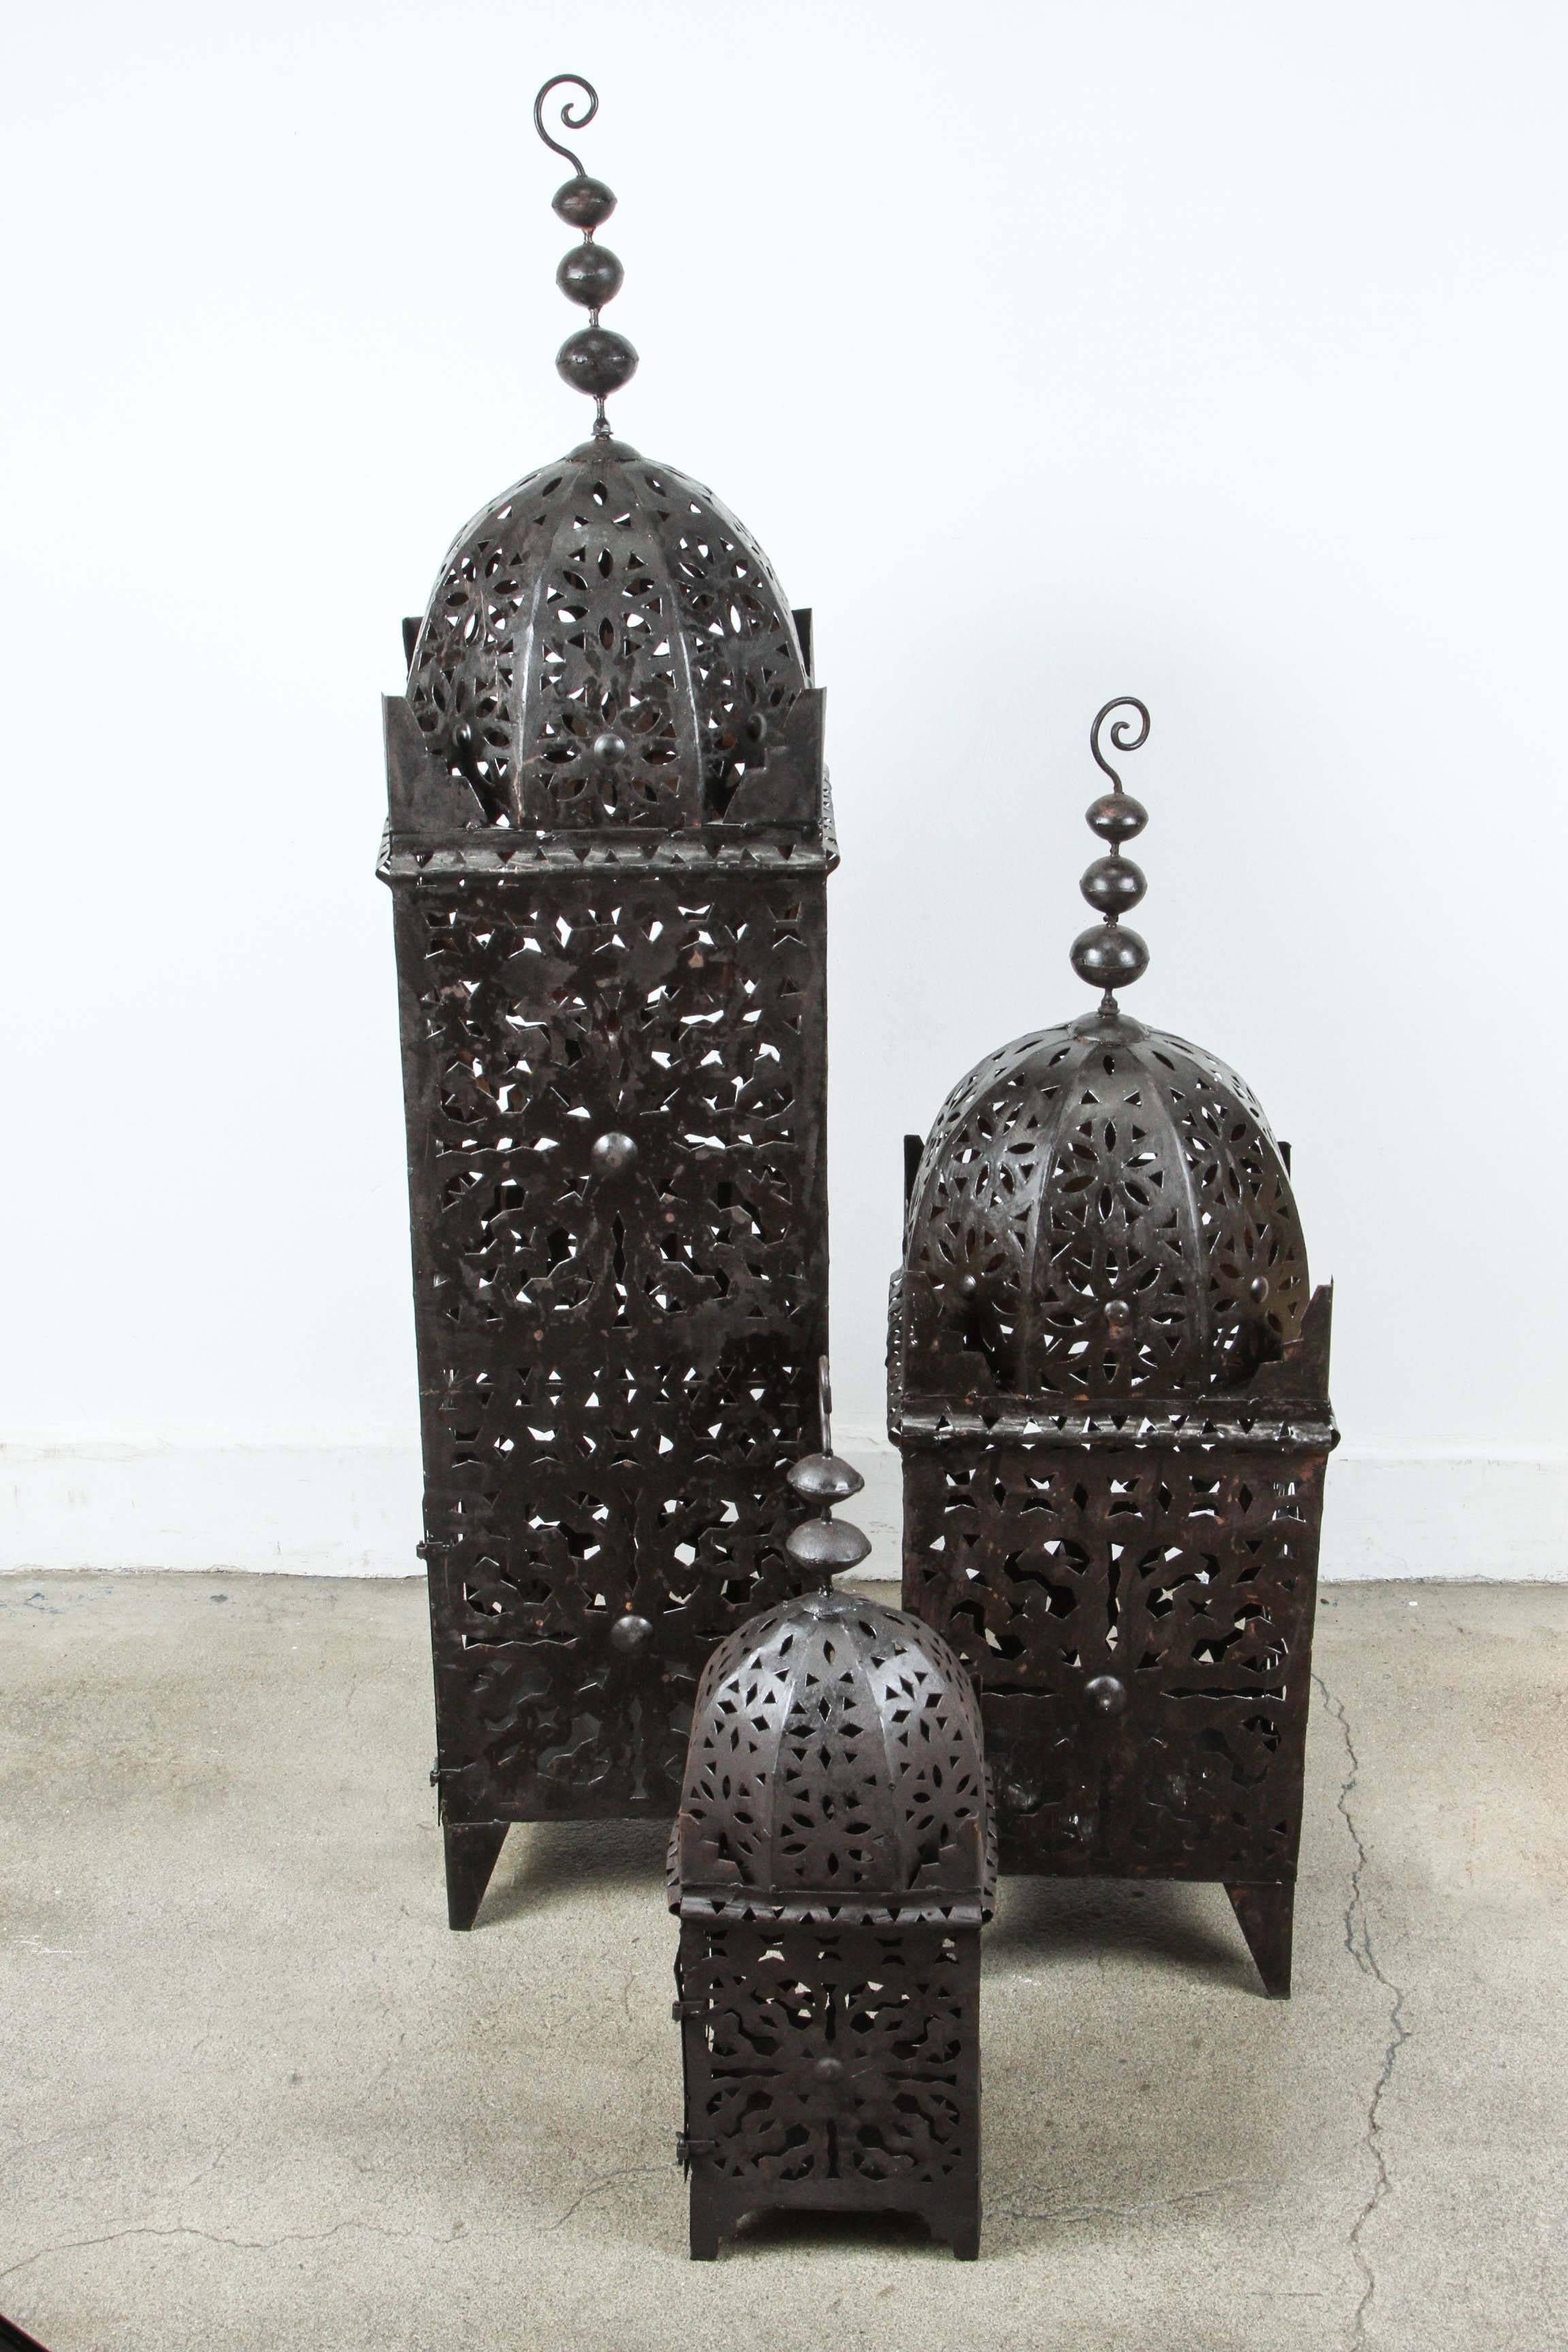 Set of three Large Moroccan metal candle lanterns.
Hurricane candle lamp handcrafted in Morocco by artisans, metal hand-cut and hammered, opening in front for use with pillar candles.
The lanterns are great to use indoor or outdoor. Multiple